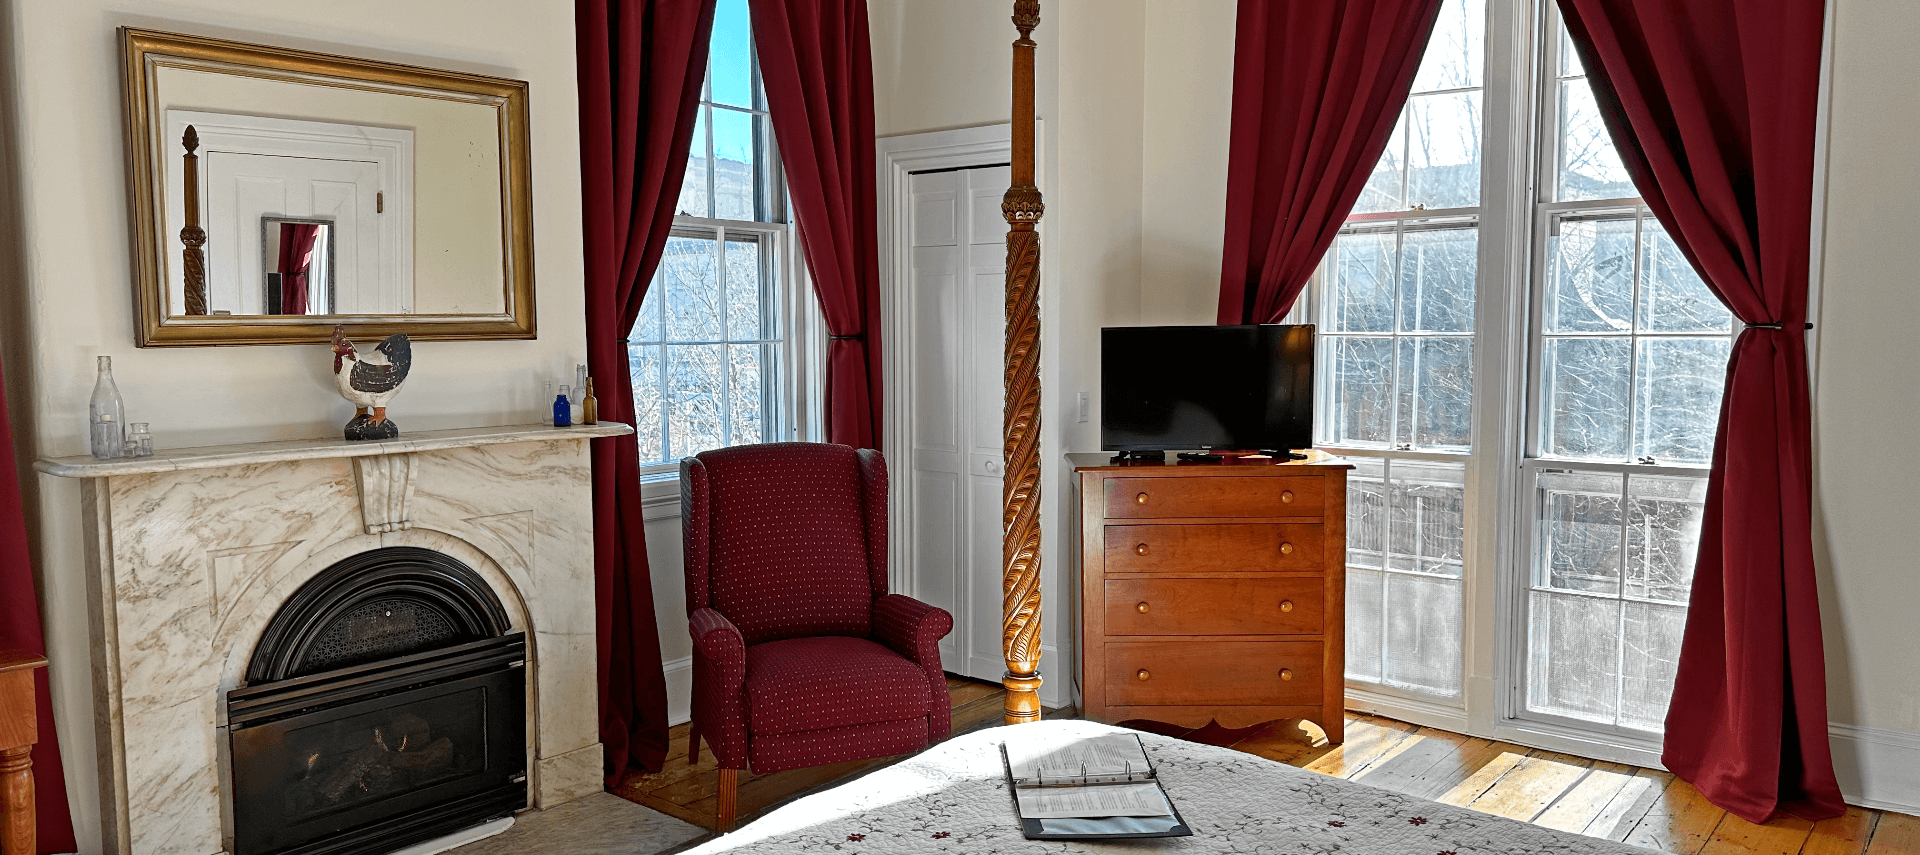 A room with a 4 poster bed, marble fireplace, and a chair.